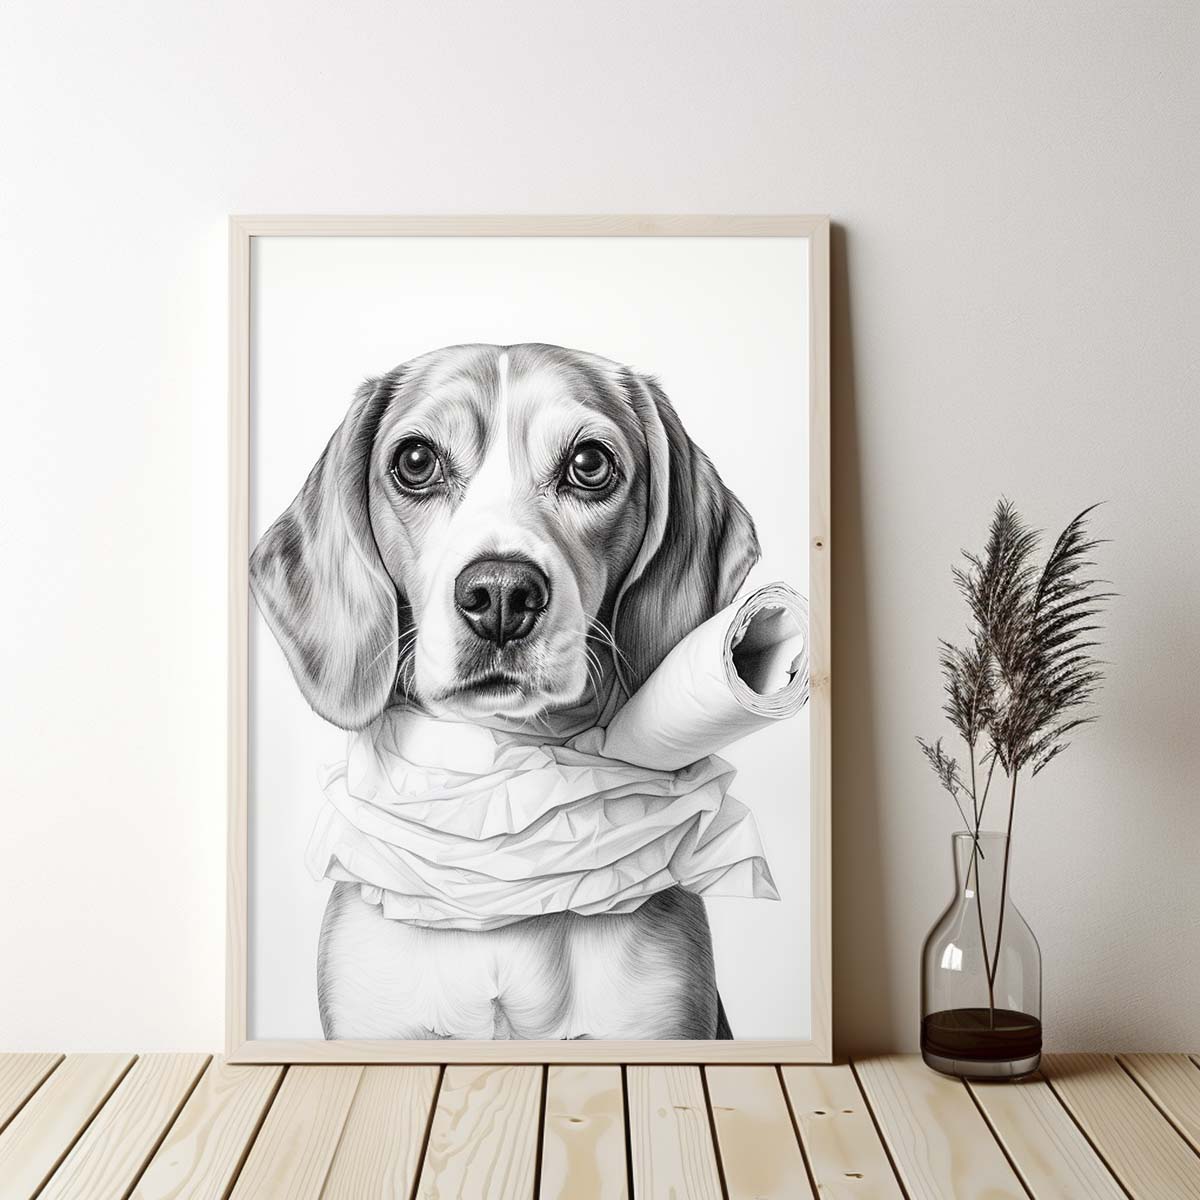 Beagle With Toilet Paper, Canvas Or Poster, Funny Dog Art, Bathroom Wall Decor, Home Decor, Bathroom Wall Art, Dog Wall Decor, Animal Decor, Pet Gift, Pet Illustration, Digital Download